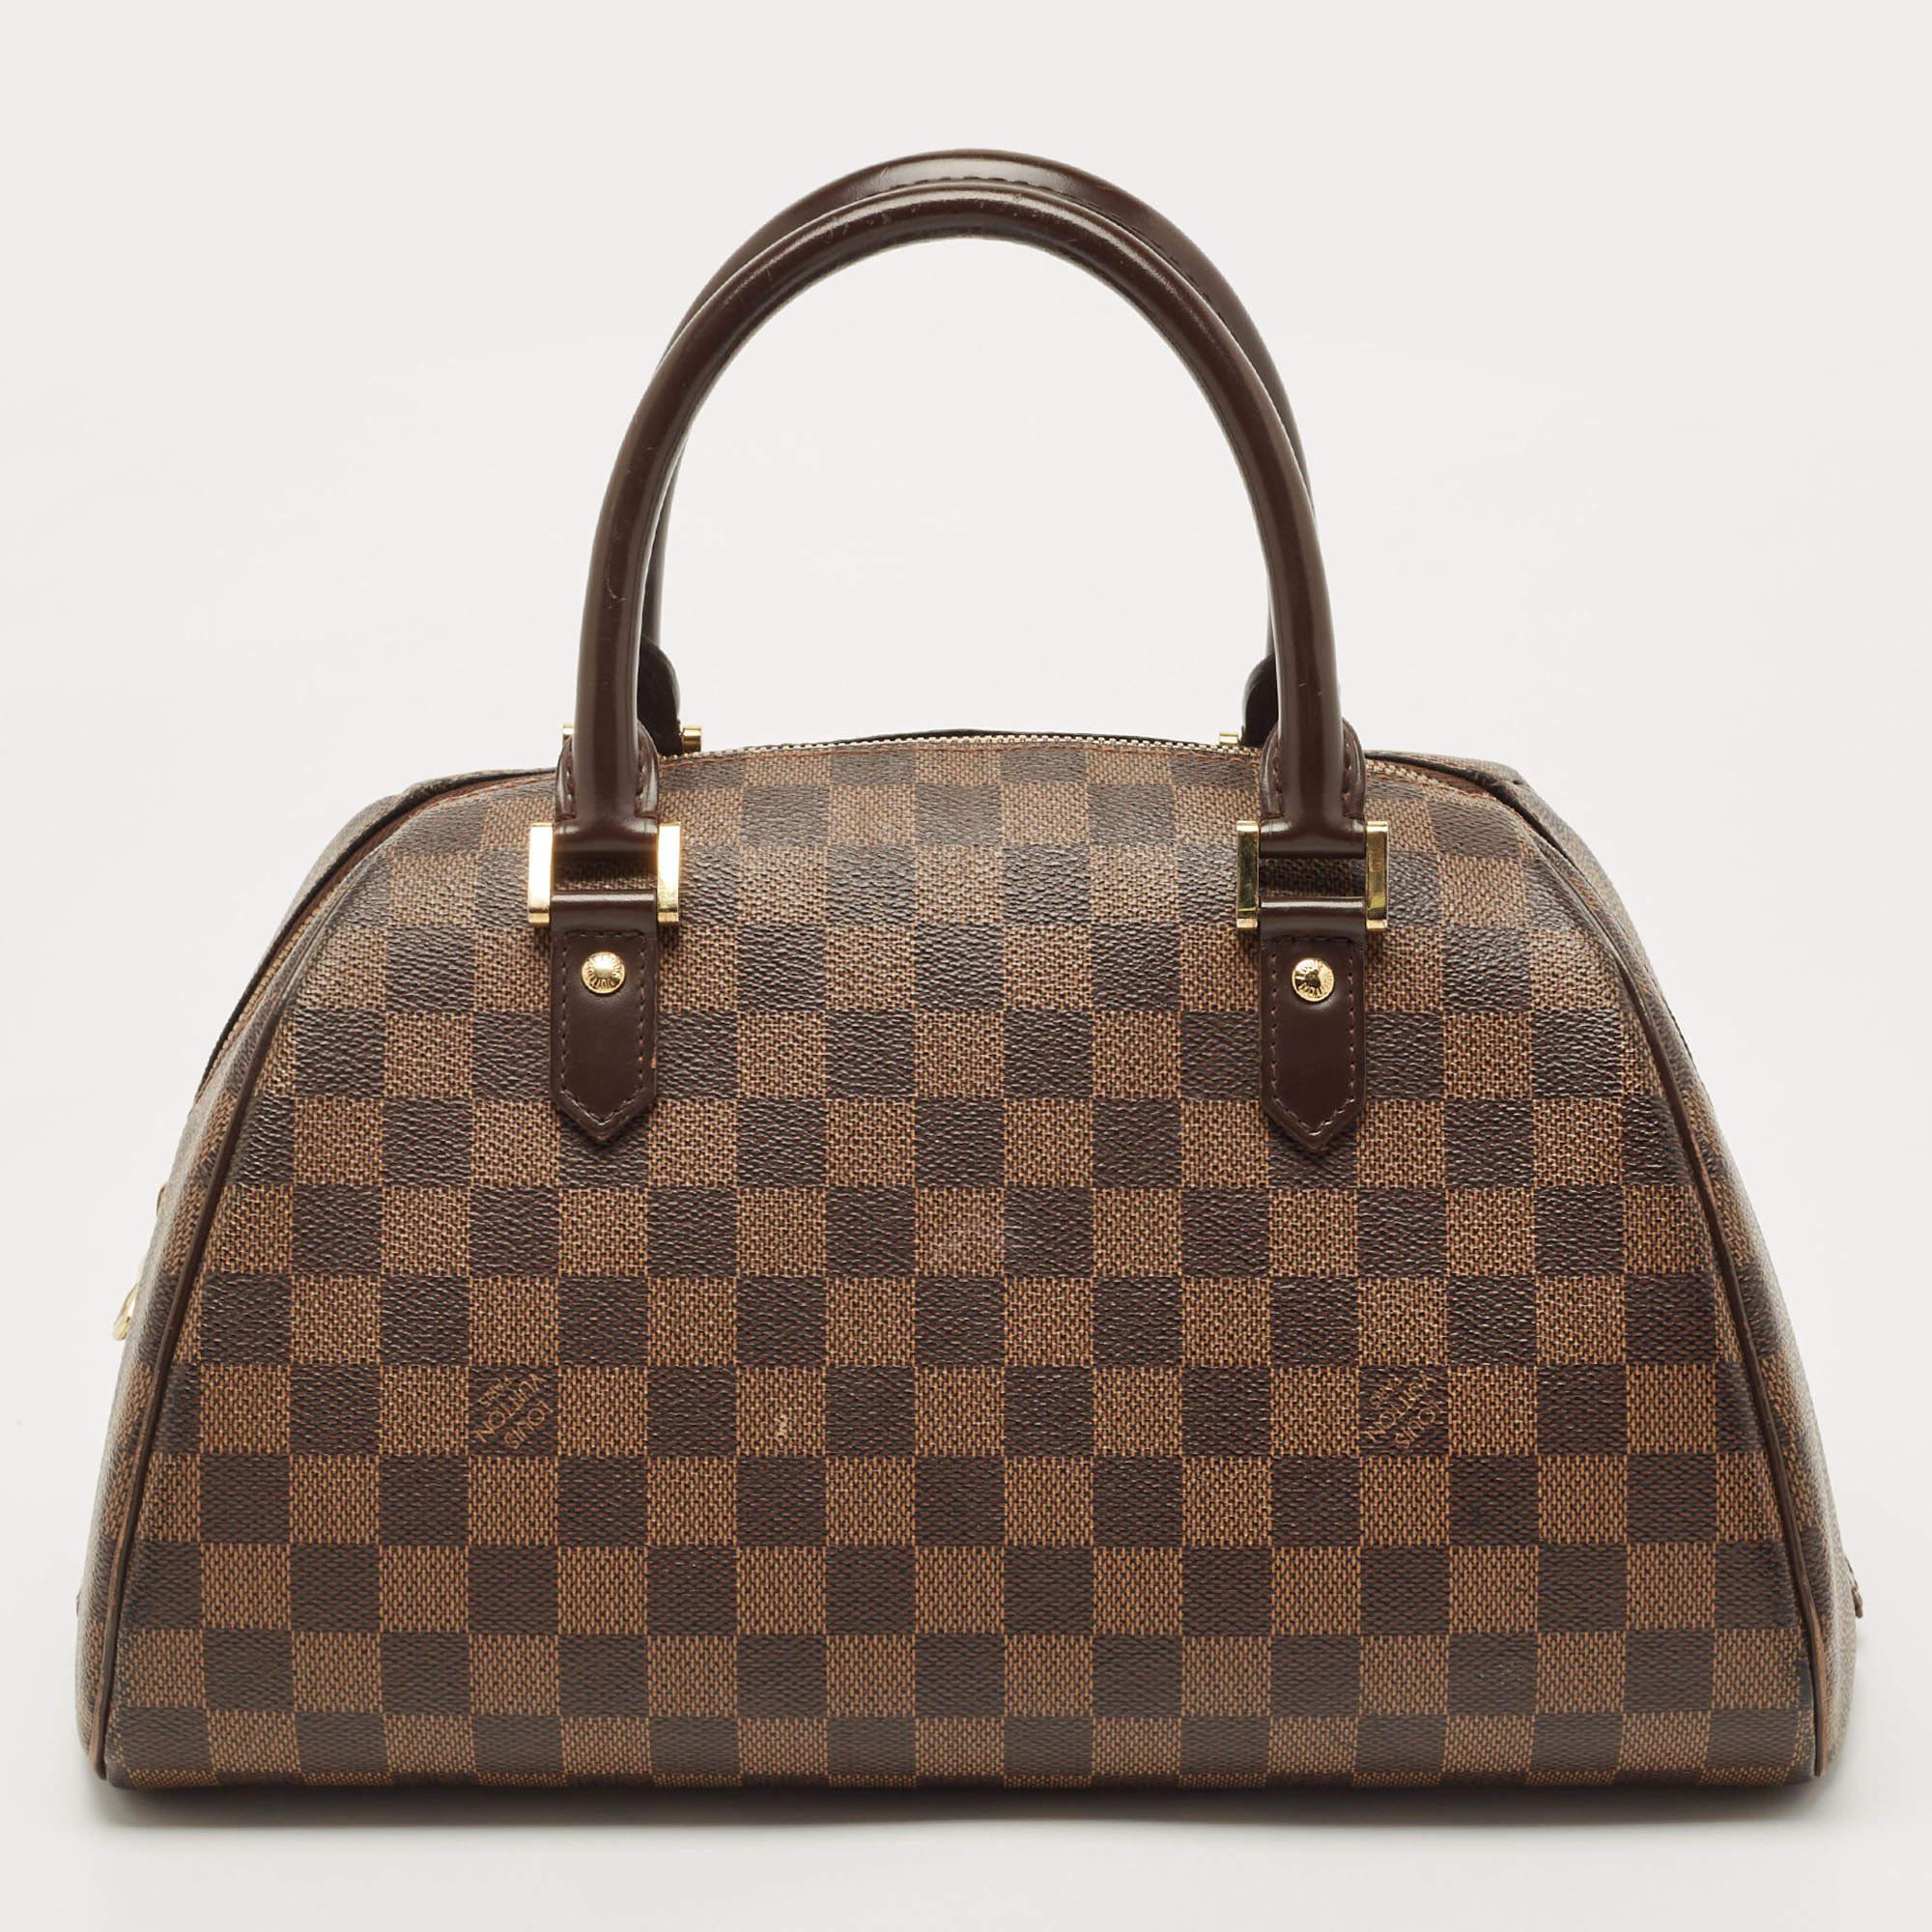 Louis Vuitton’s Ribera MM bag will become your favourite bag in no time. Crafted from signature Damier ebene canvas, it features dual rolled top handles and a wrap-around zip closure that opens to a fabric-lined interior that houses a cell-phone